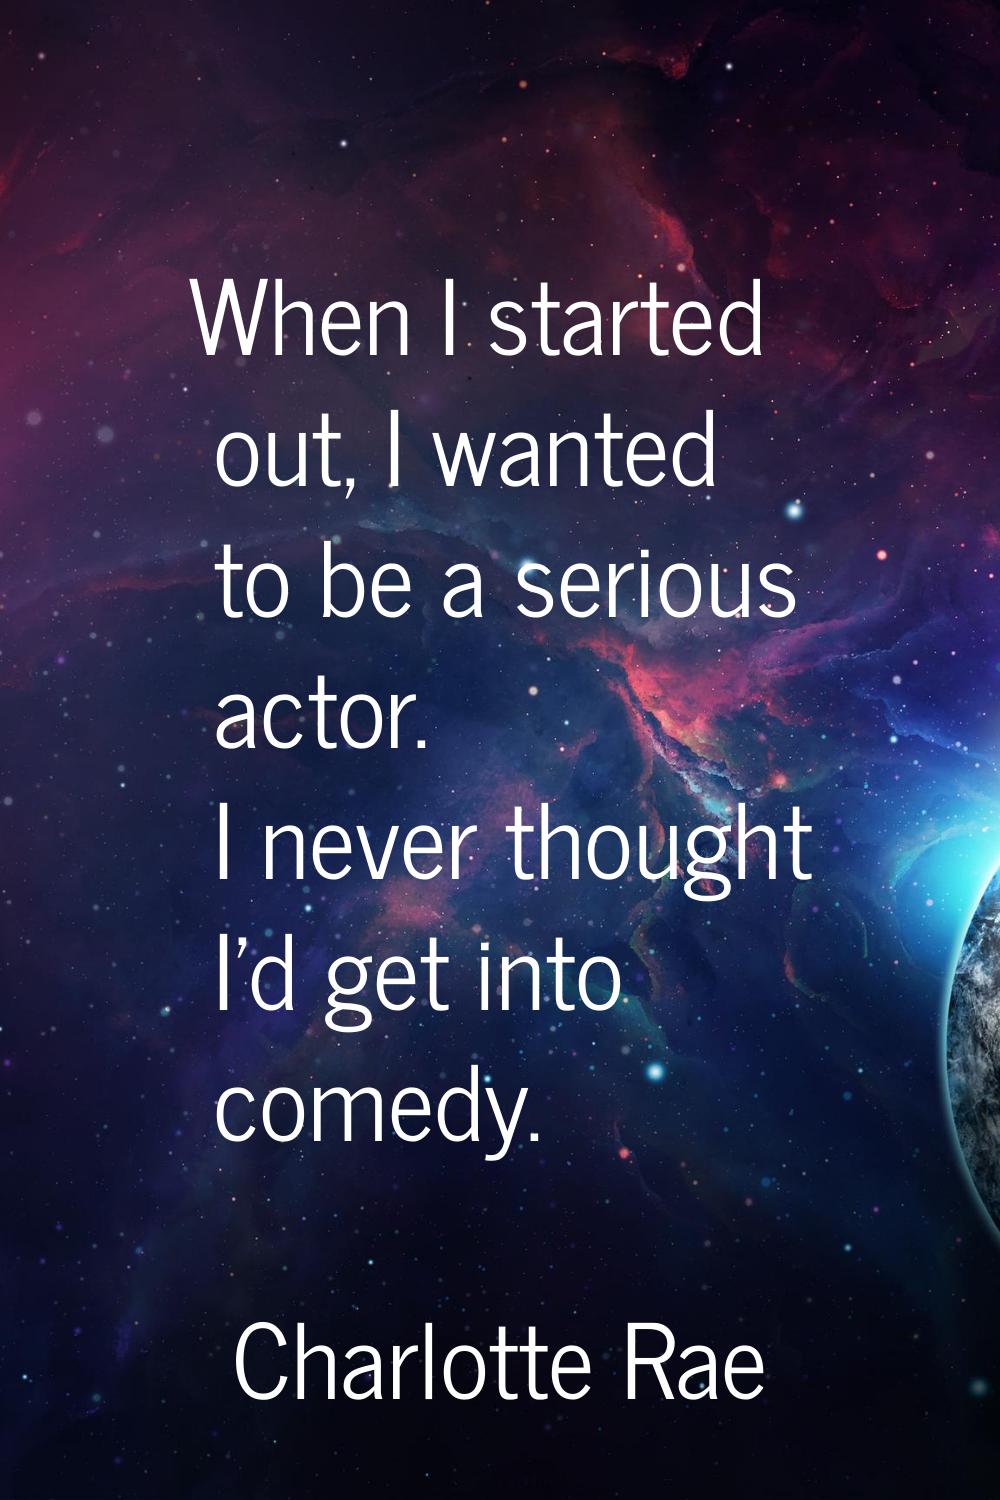 When I started out, I wanted to be a serious actor. I never thought I'd get into comedy.